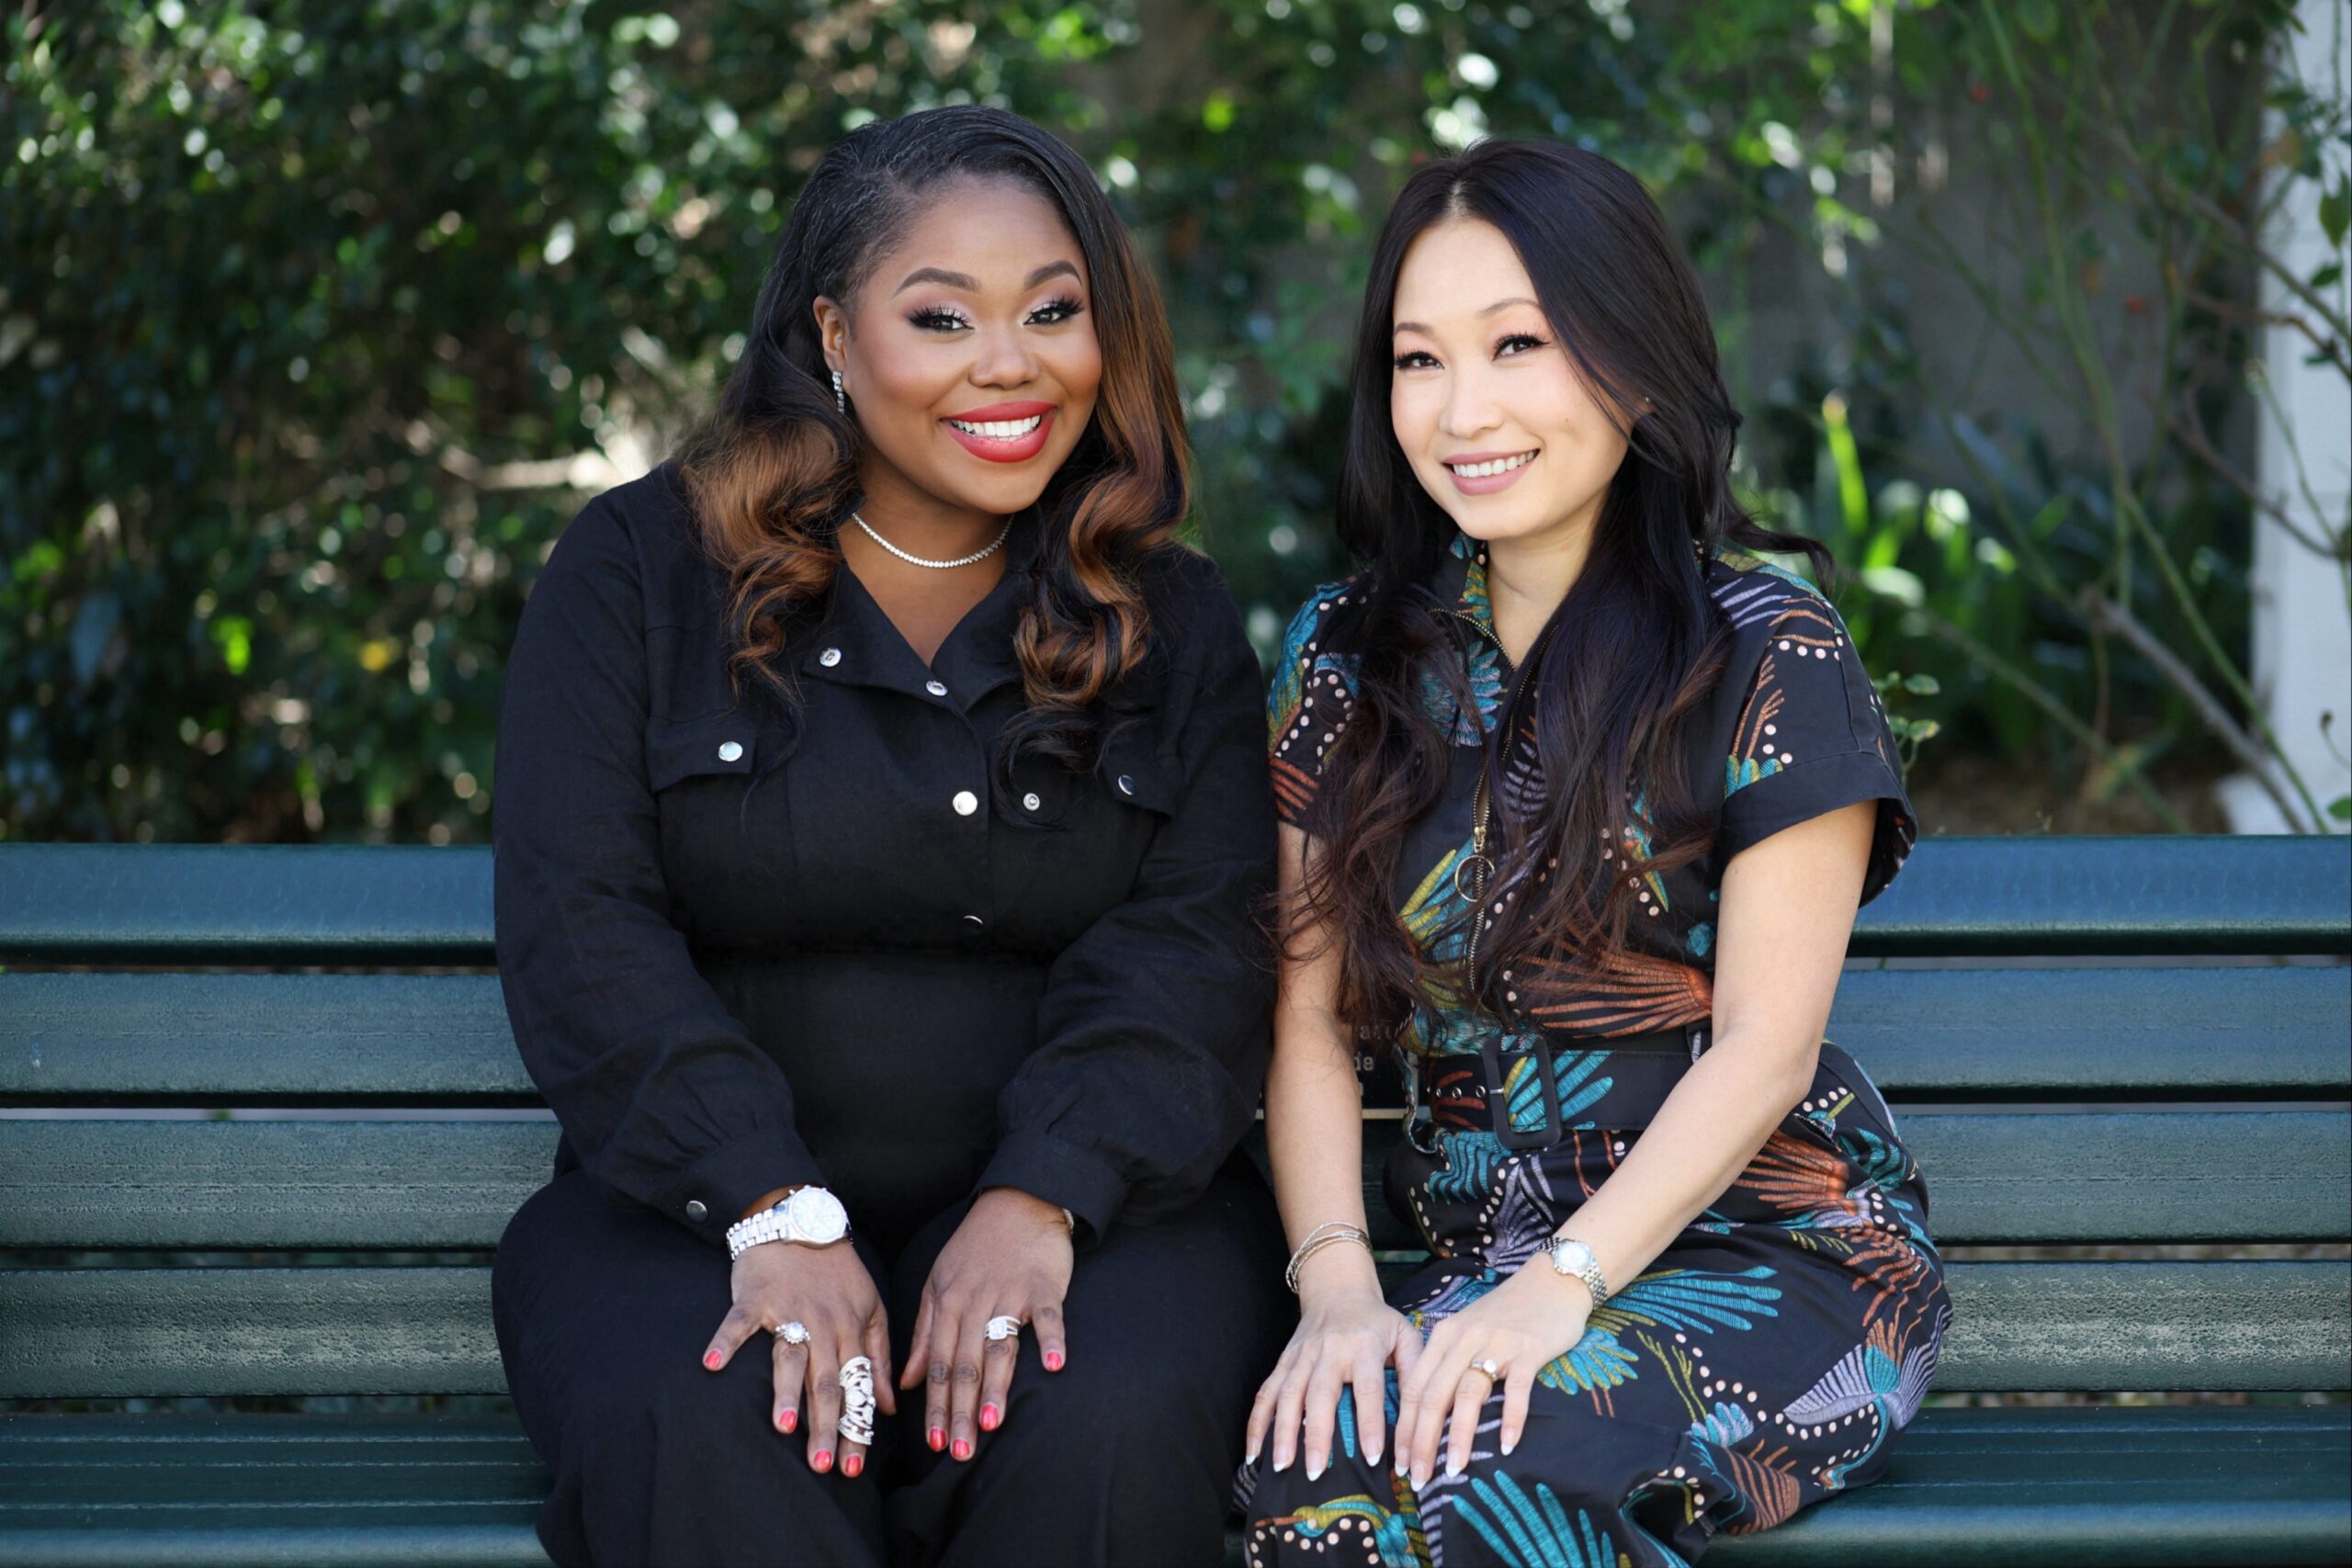 Shermona Clark and Cyndy Nguyen - Through a Friend, Relationships, Matchmakers